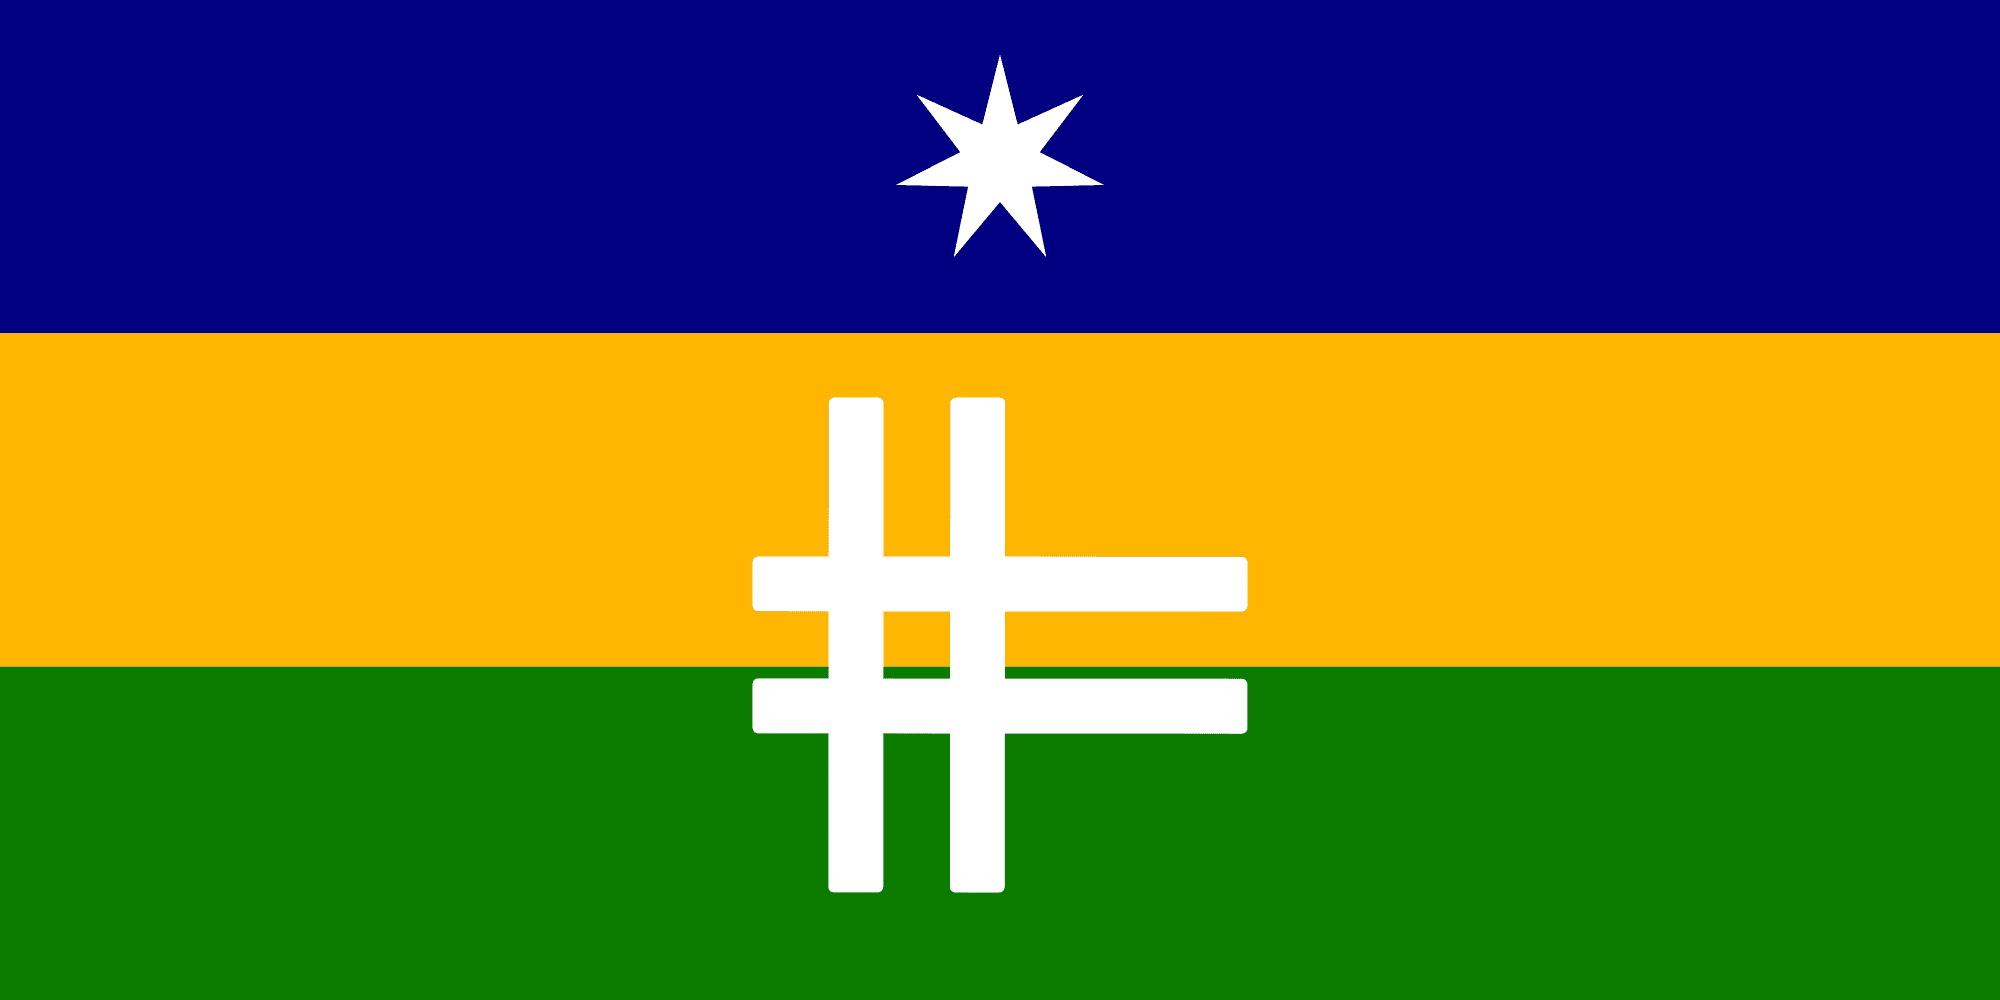 The redesigned Adelaide flag